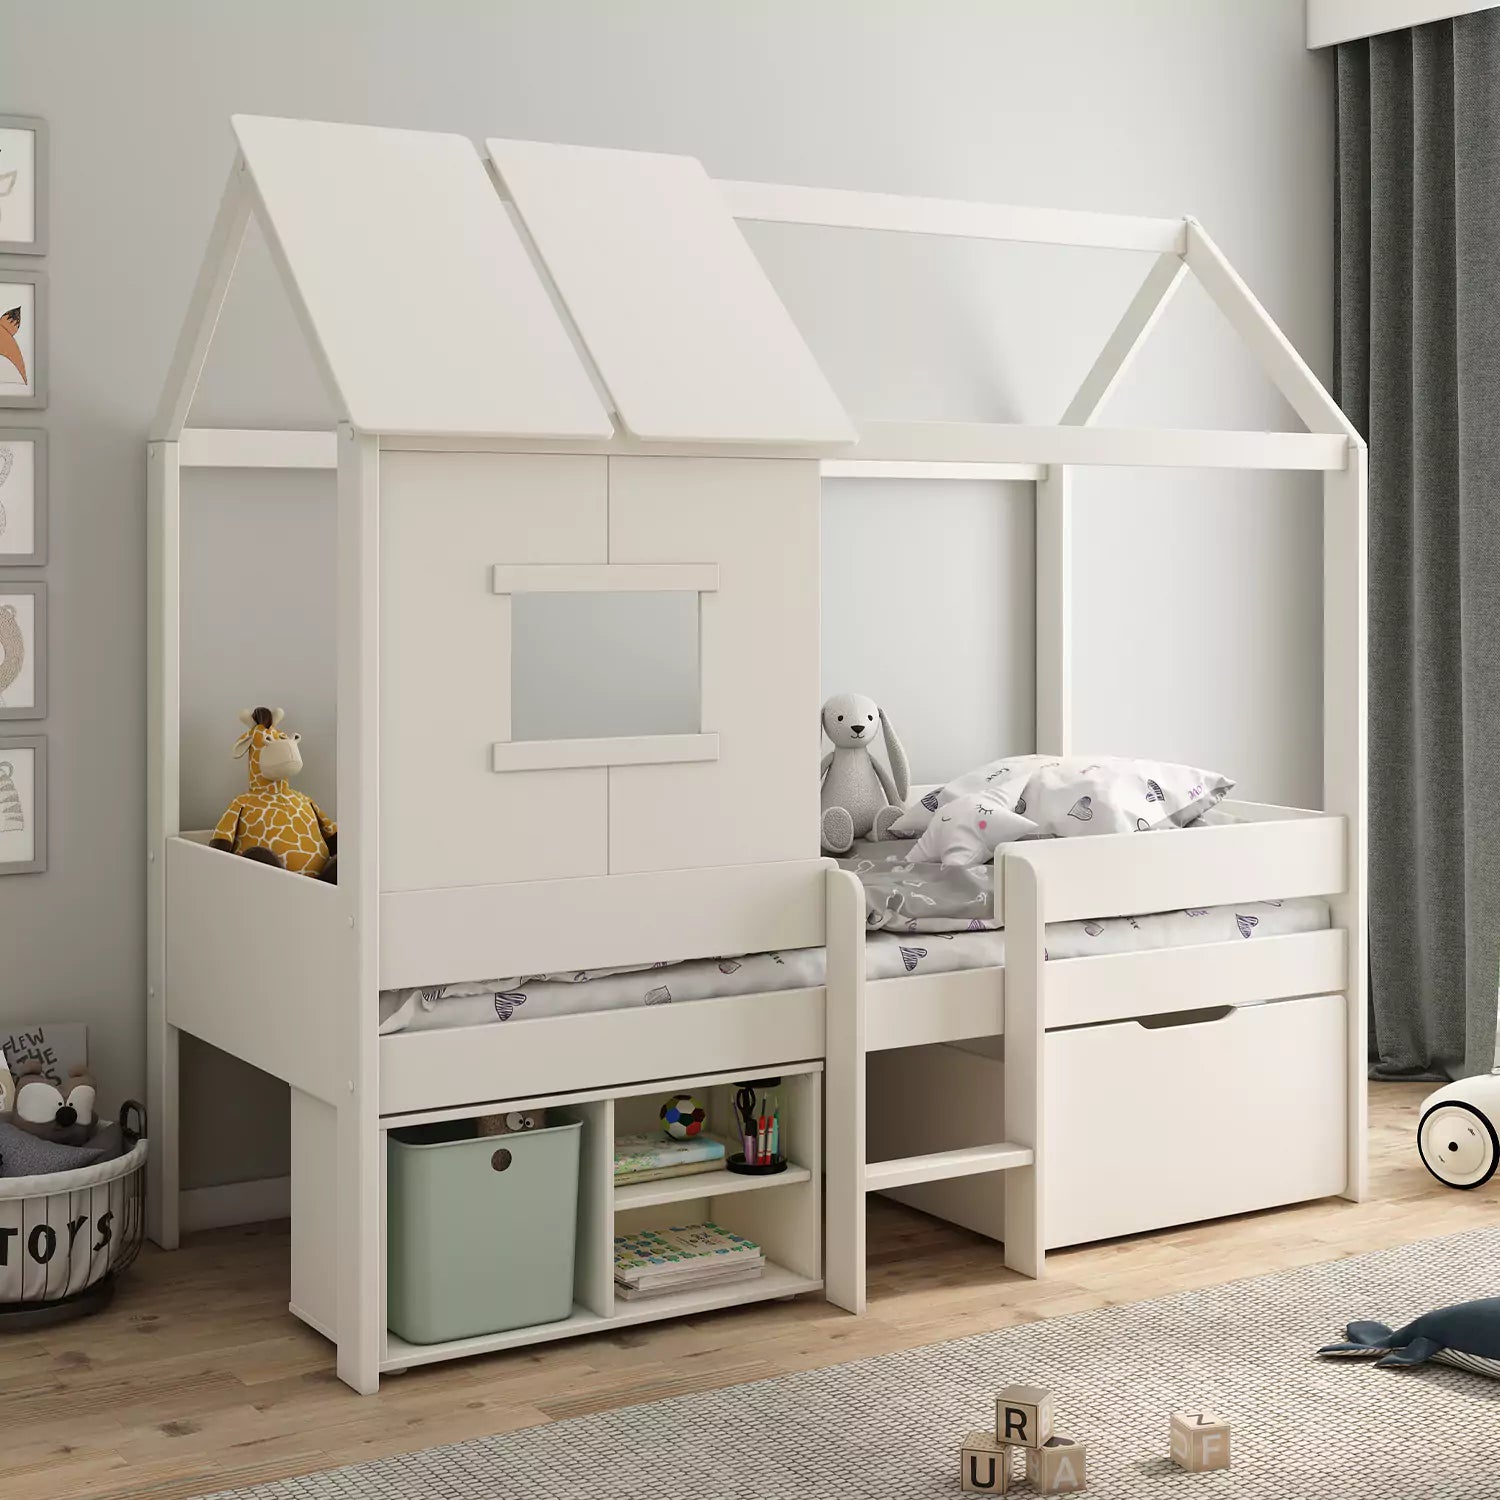 An image of Buy Ordi 2 Mini Playhouse Daybed with Storage - White